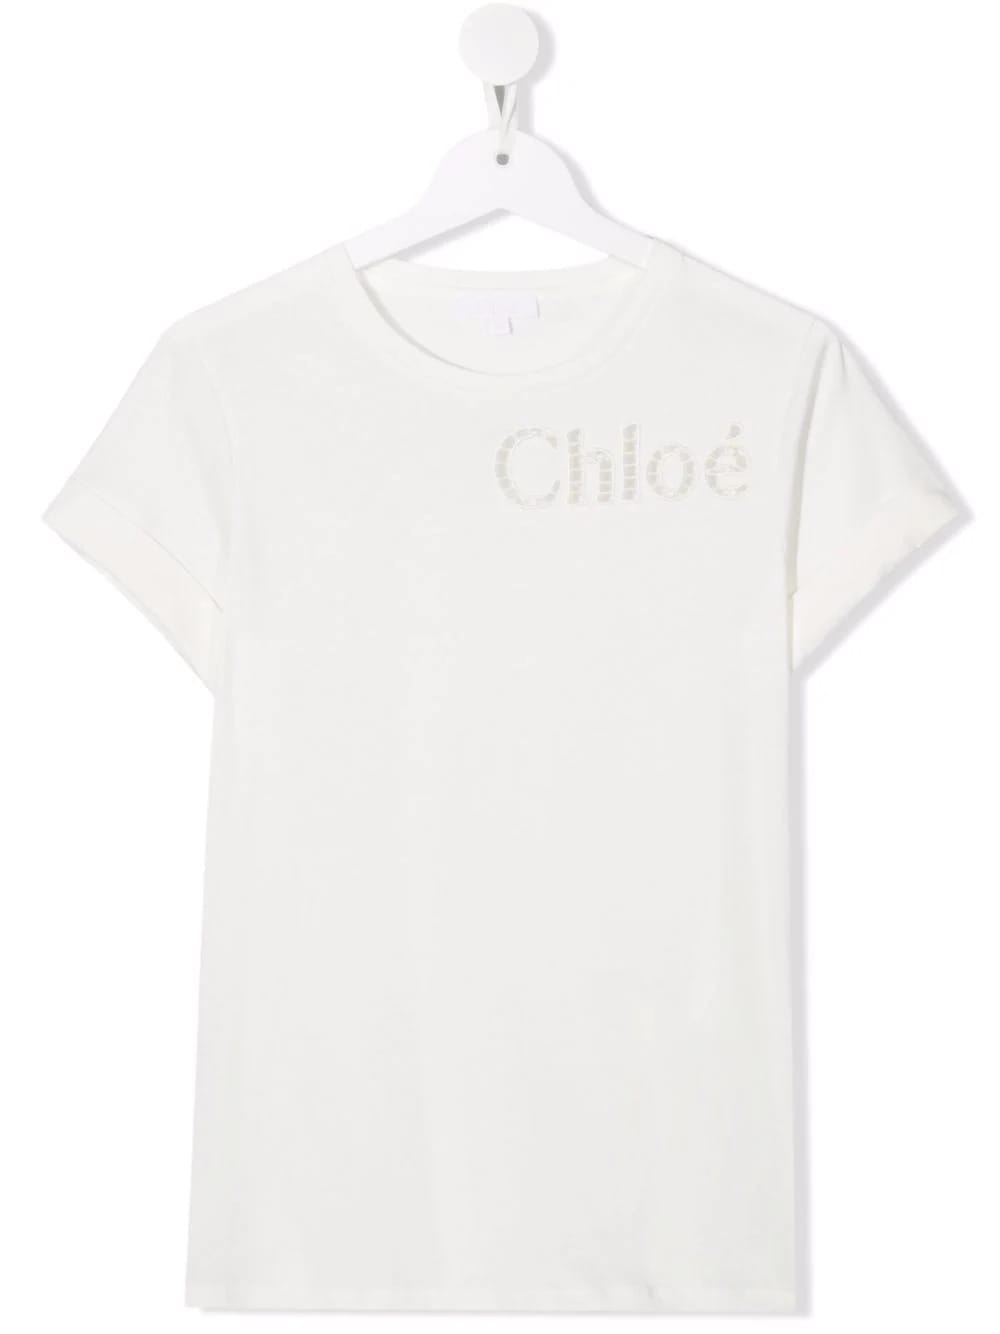 Chloé Kids White T-shirt With Perforated Chloe Logo